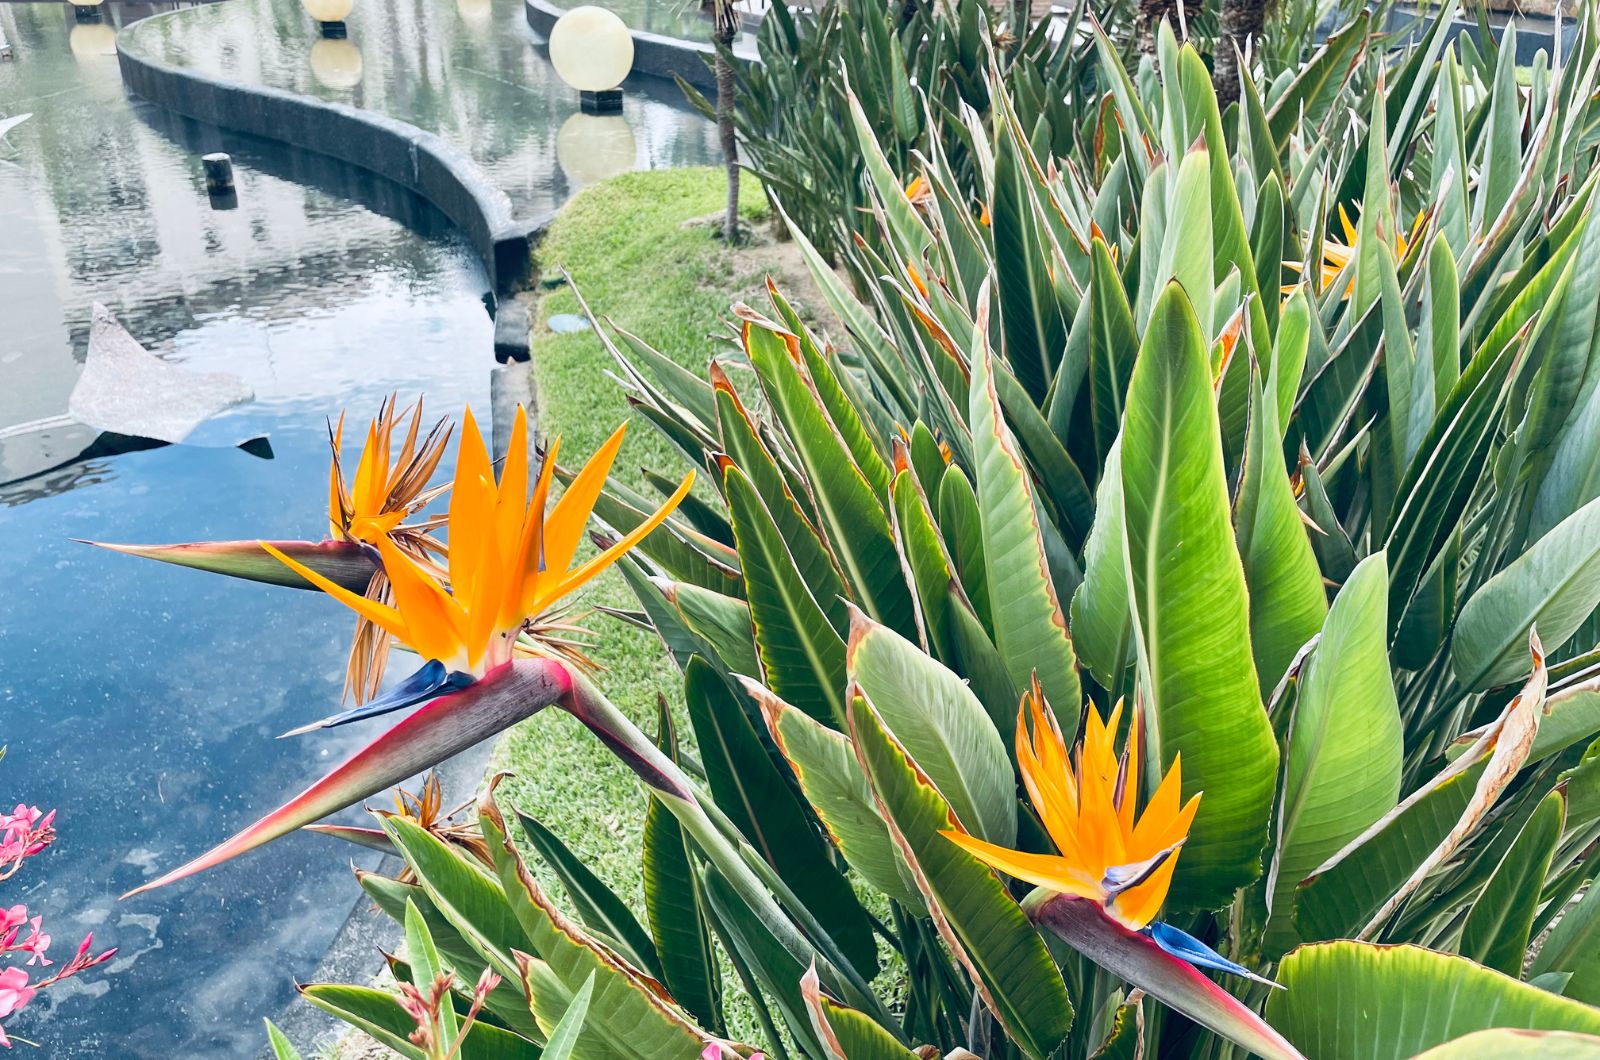 bird of paradise plant next to water